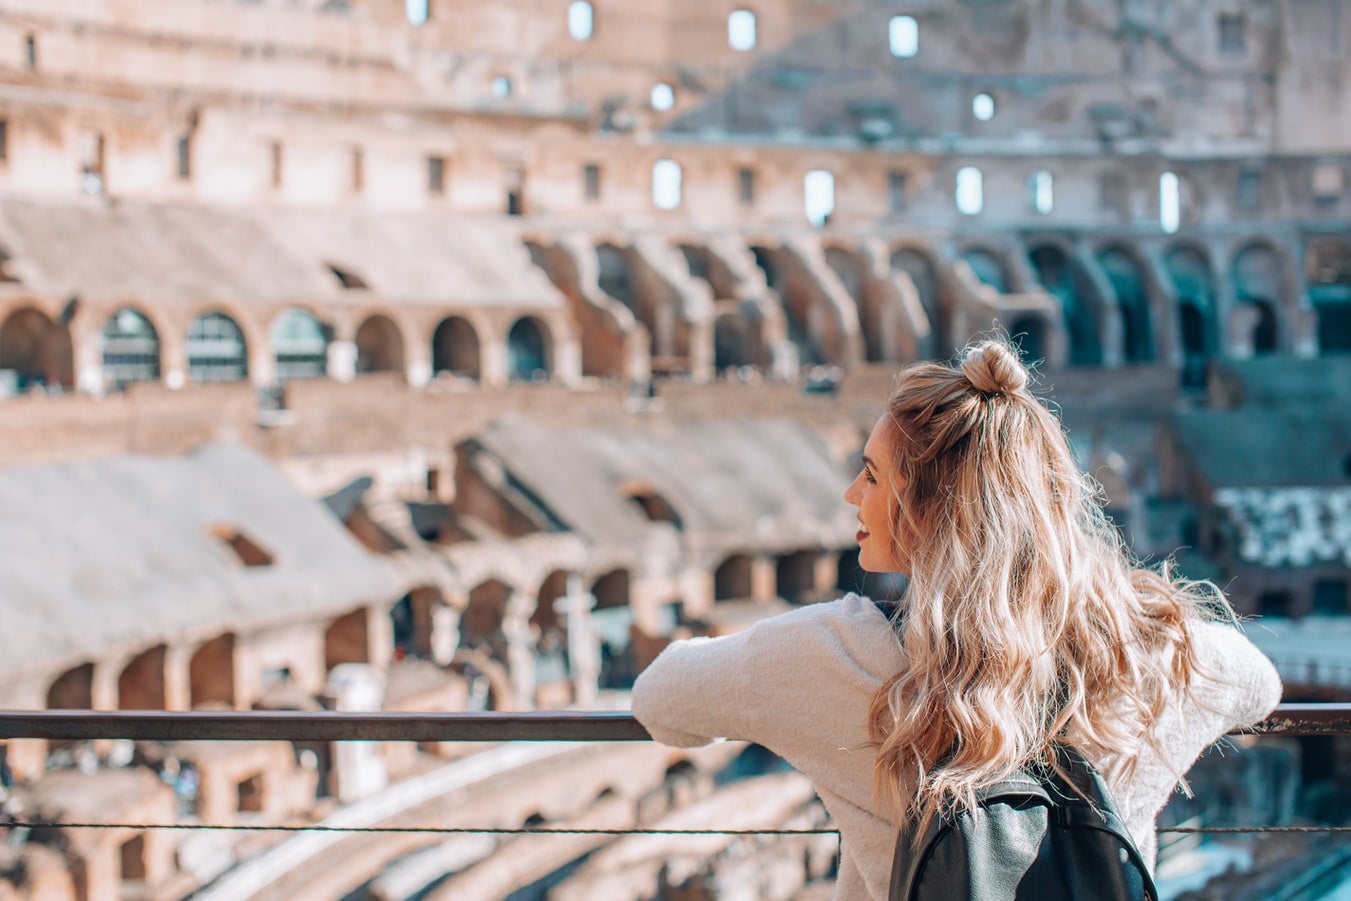 Woman visiting the Colosseum in Rome, Italy